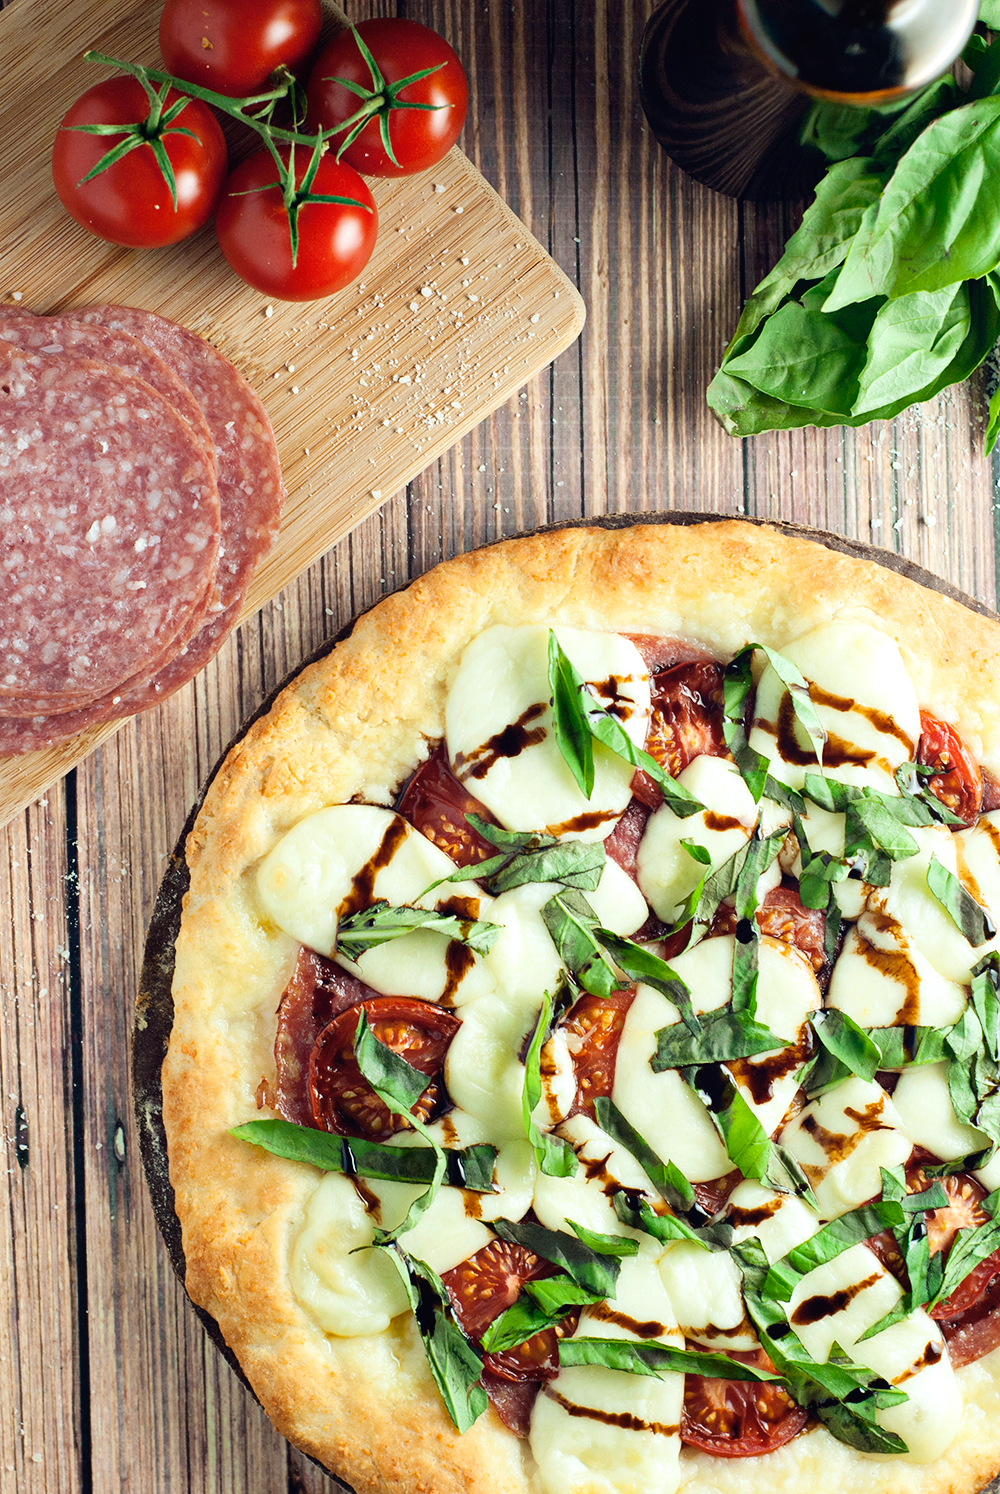 This Margherita Pizza with Salami is the real deal of delicious; a must eat tonight!